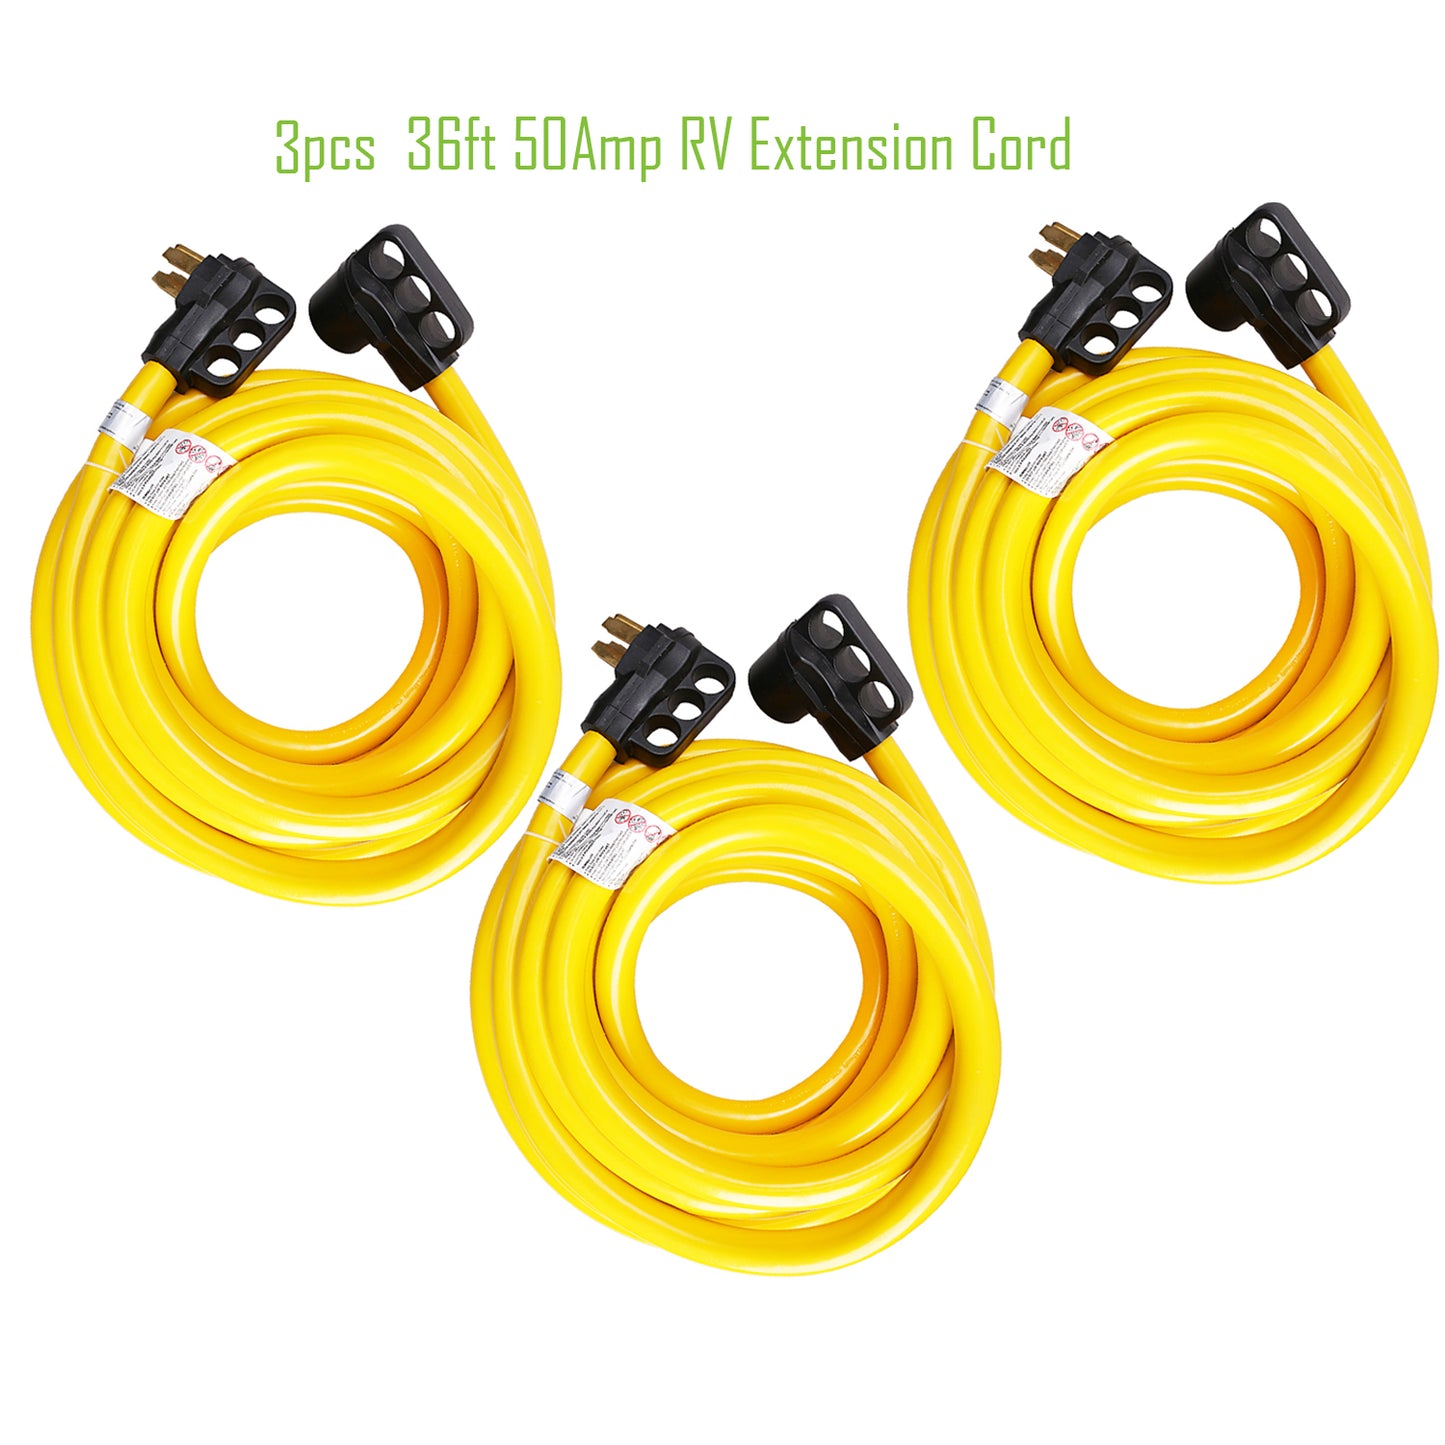 100 ft 50 amp rv extension cord yellow